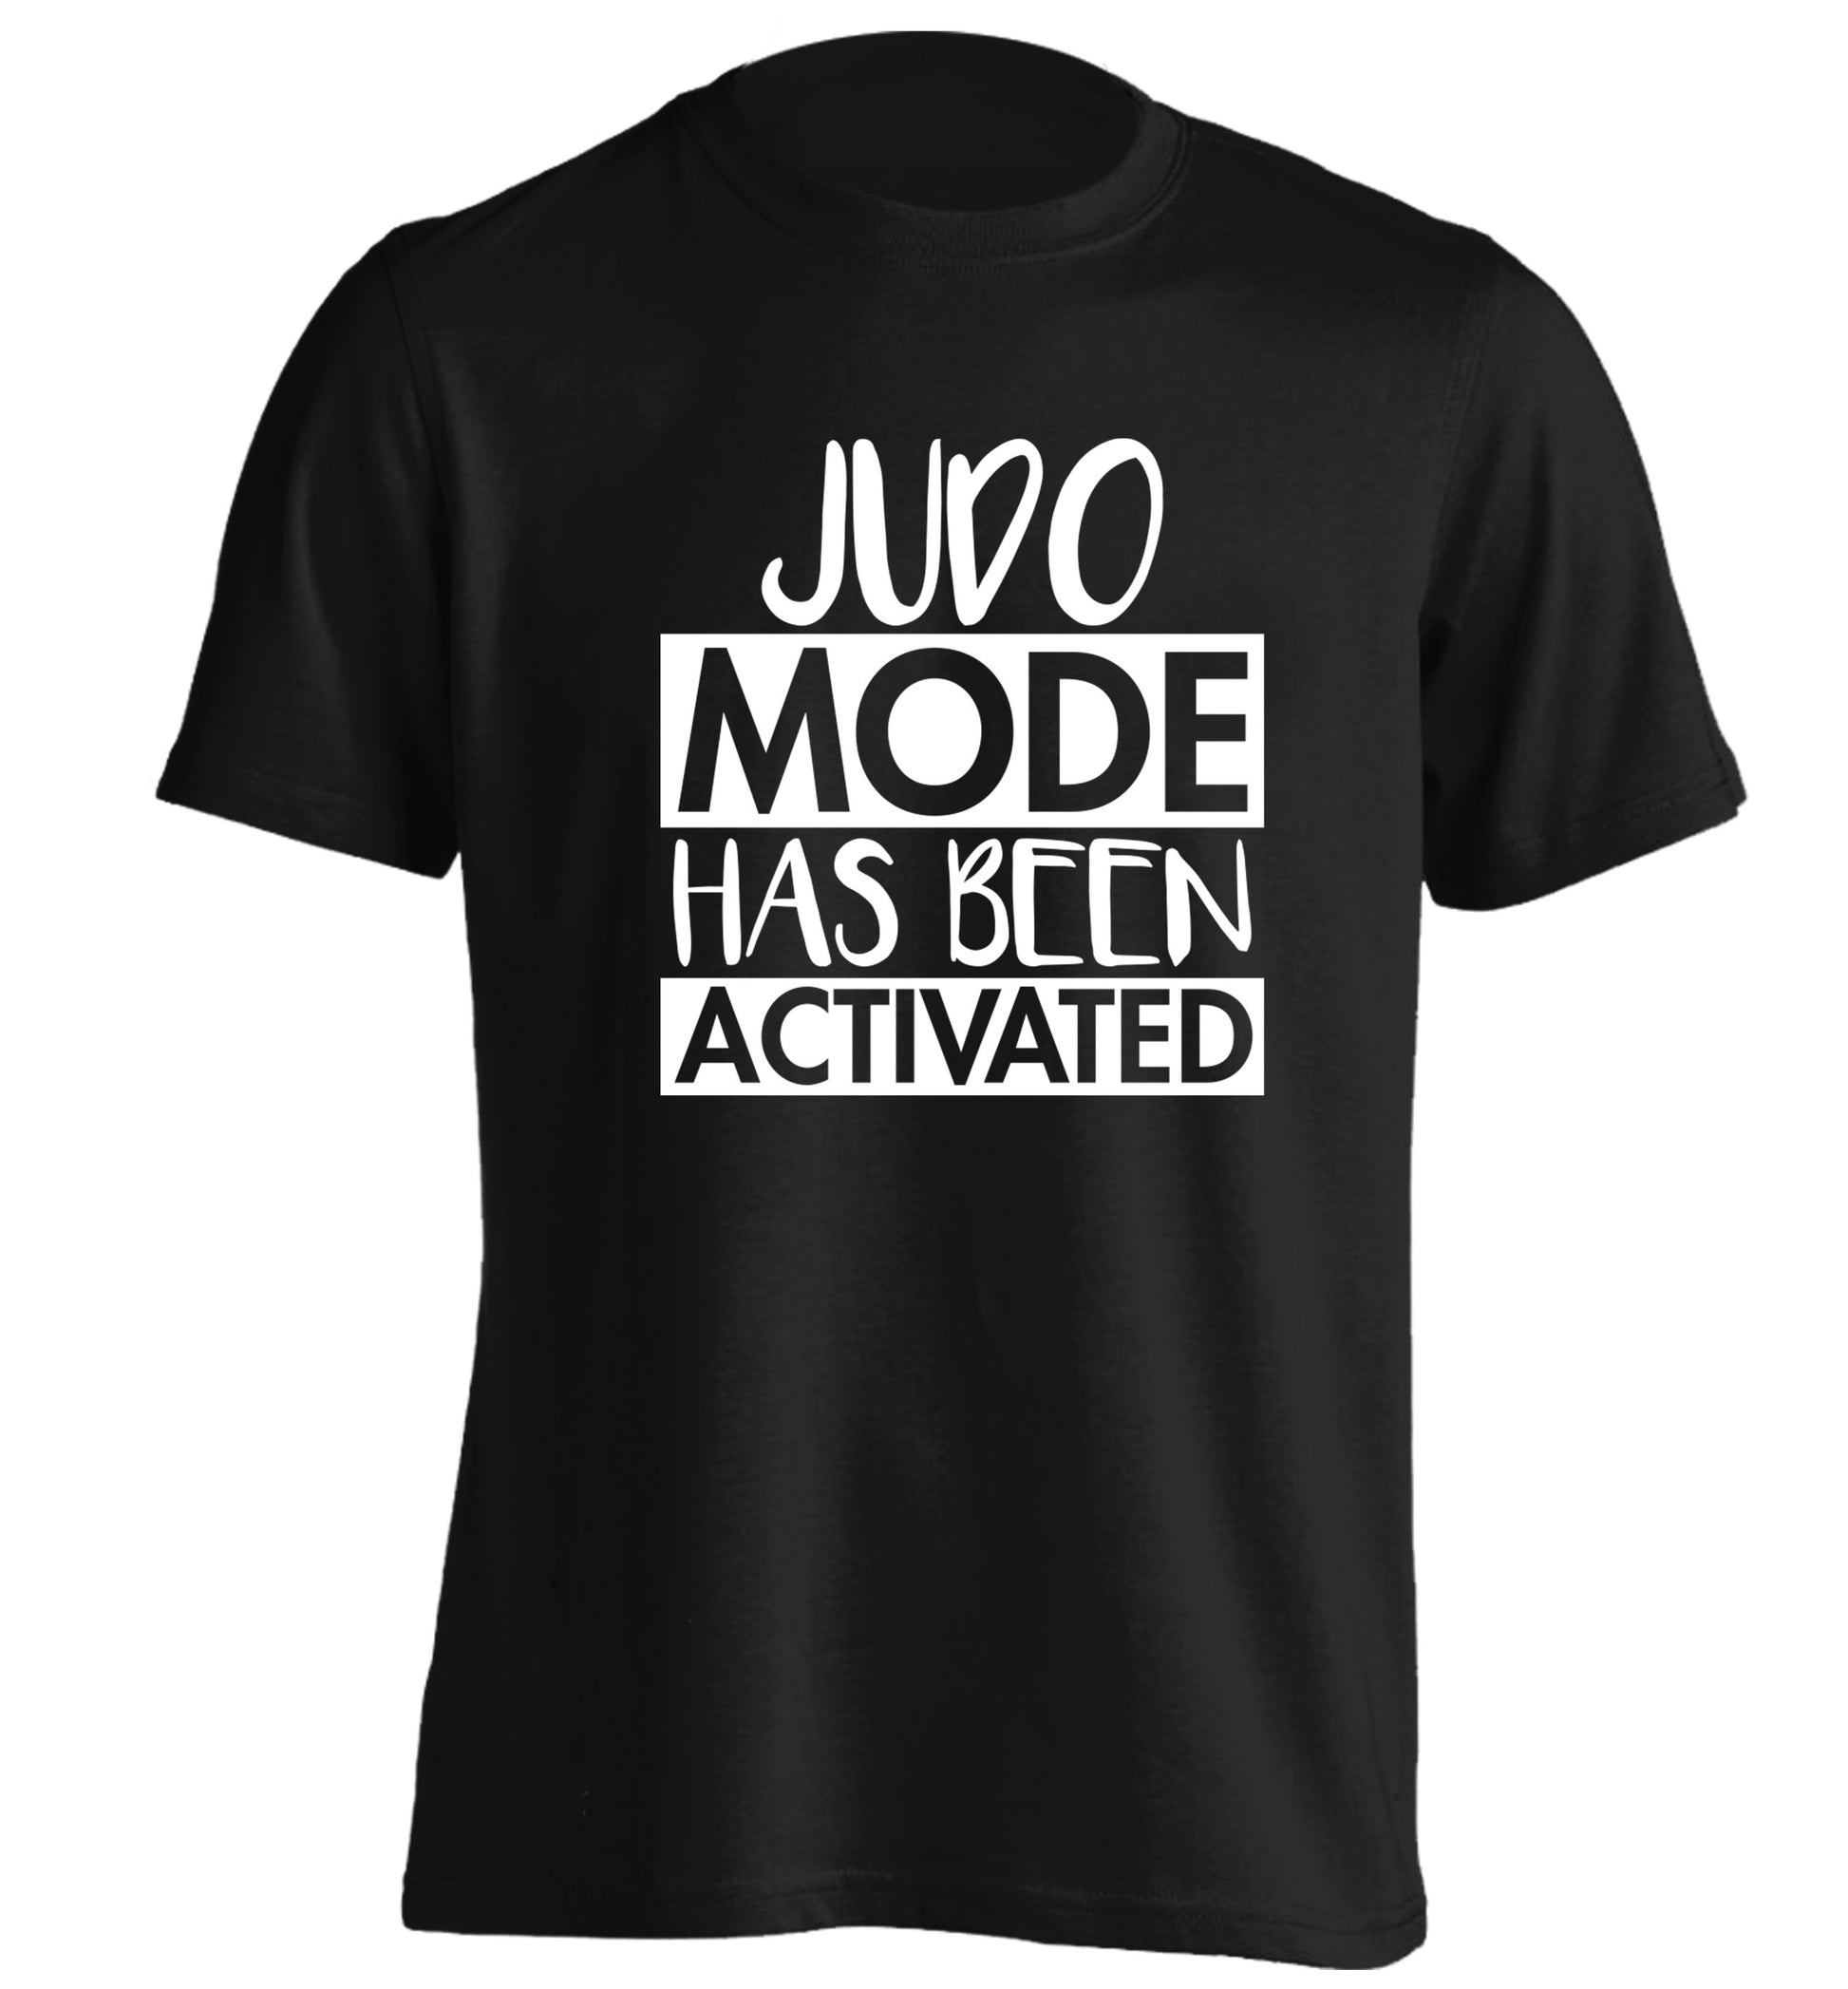 Judo mode activated adults unisex black Tshirt 2XL